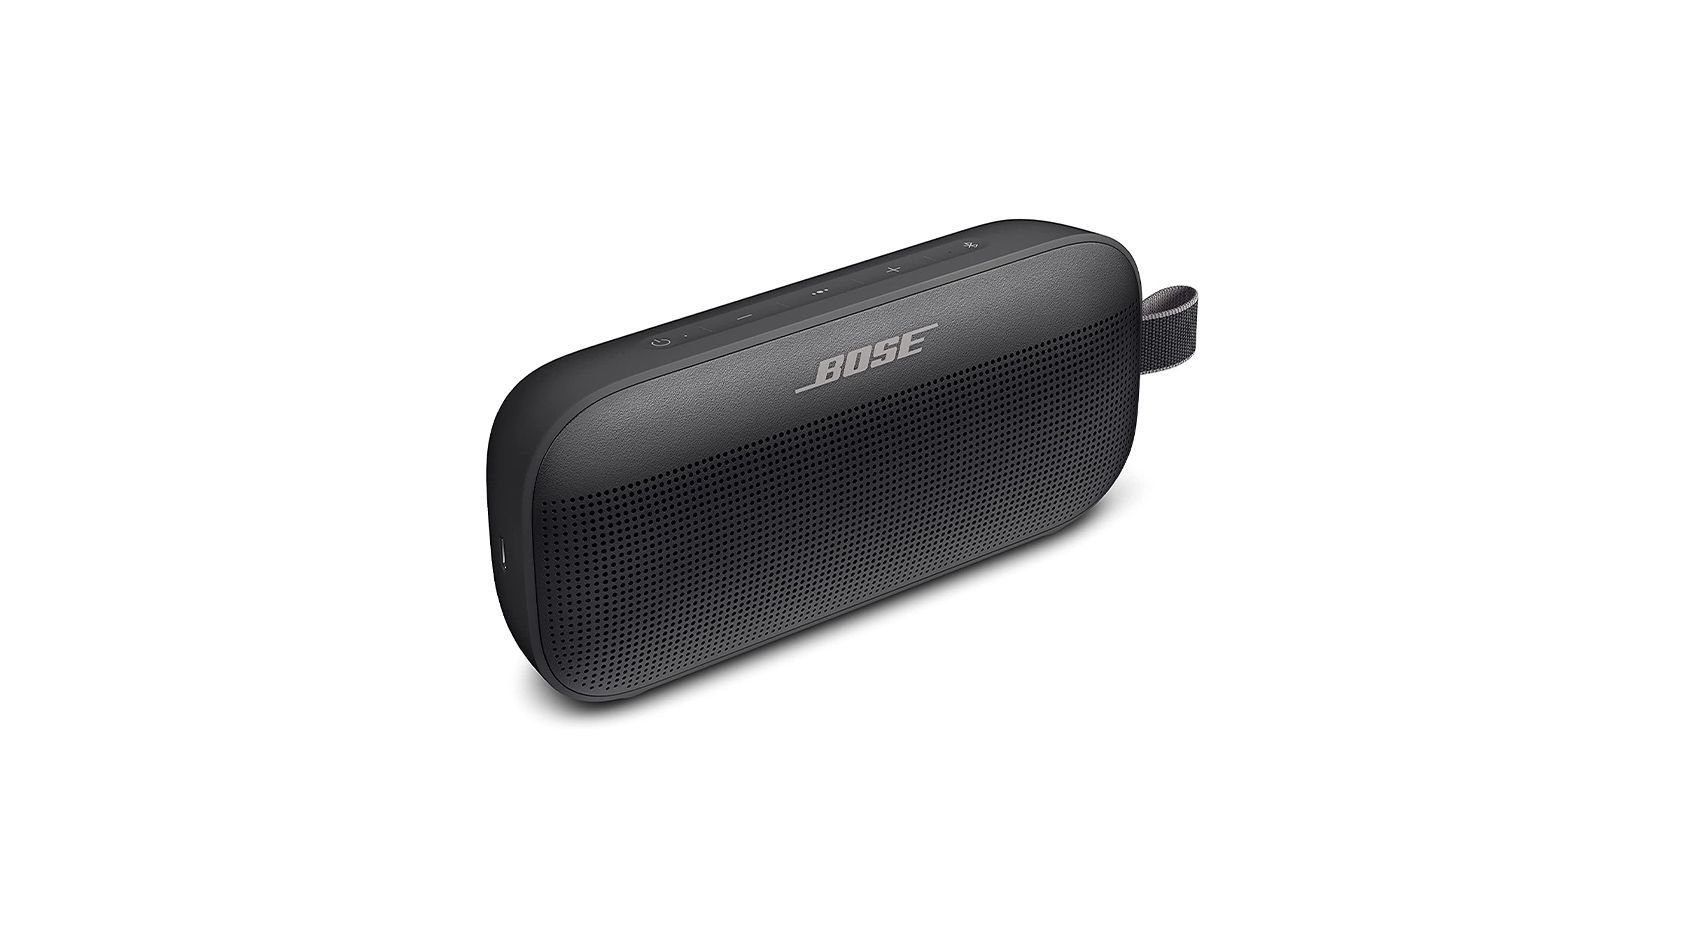 Bose SoundLink Flex Bluetooth Speaker, Portable Speaker with Microphone,  Wireless Waterproof Speaker for Travel, Outdoor and Pool Use, Black